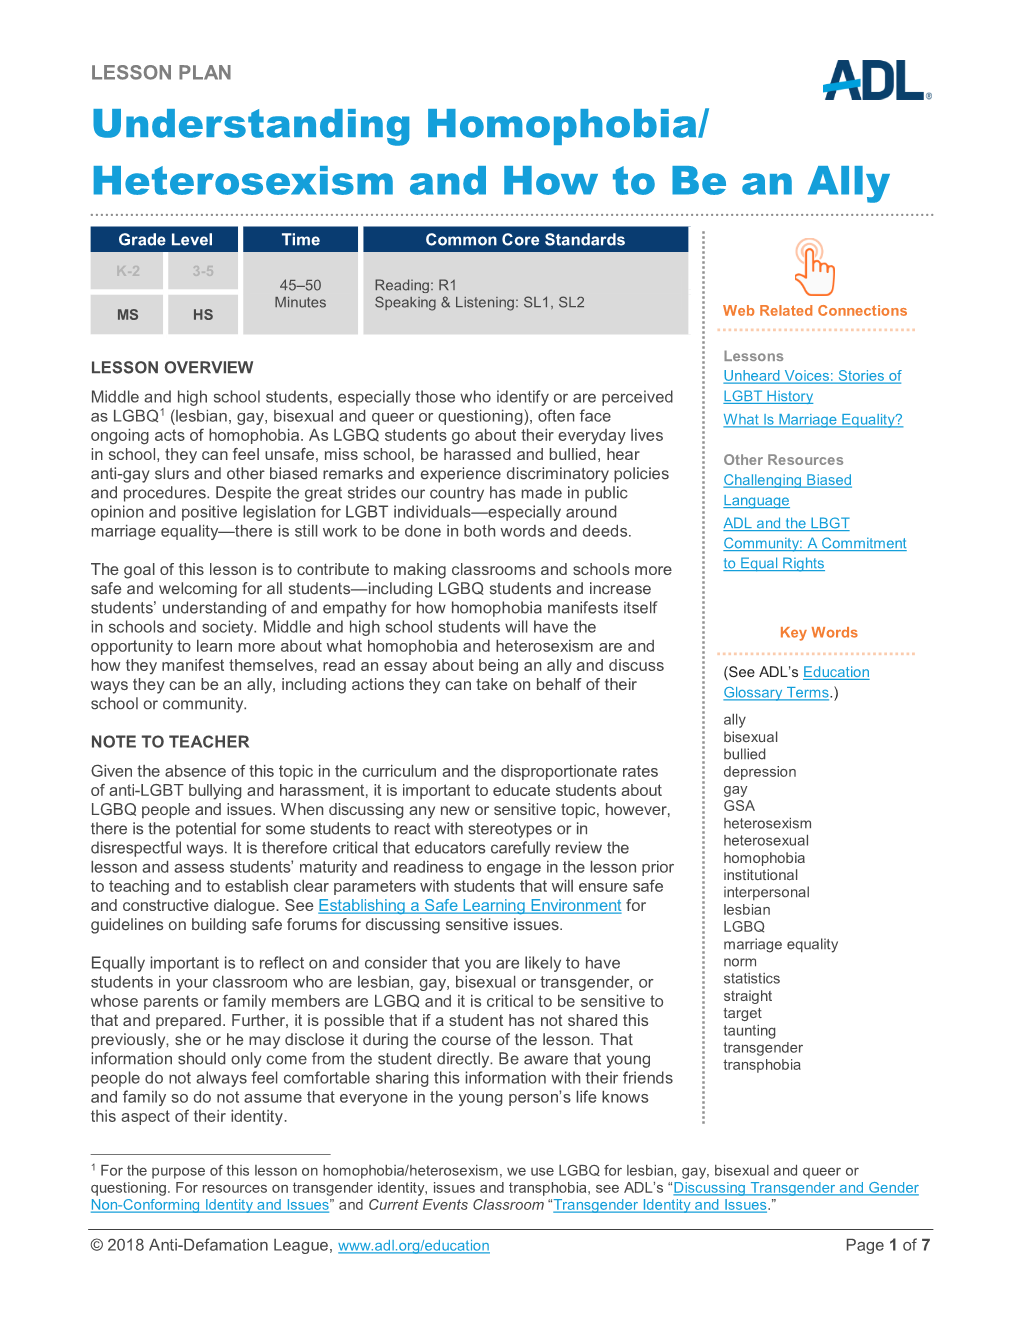 Understanding Homophobia/ Heterosexism and How to Be an Ally